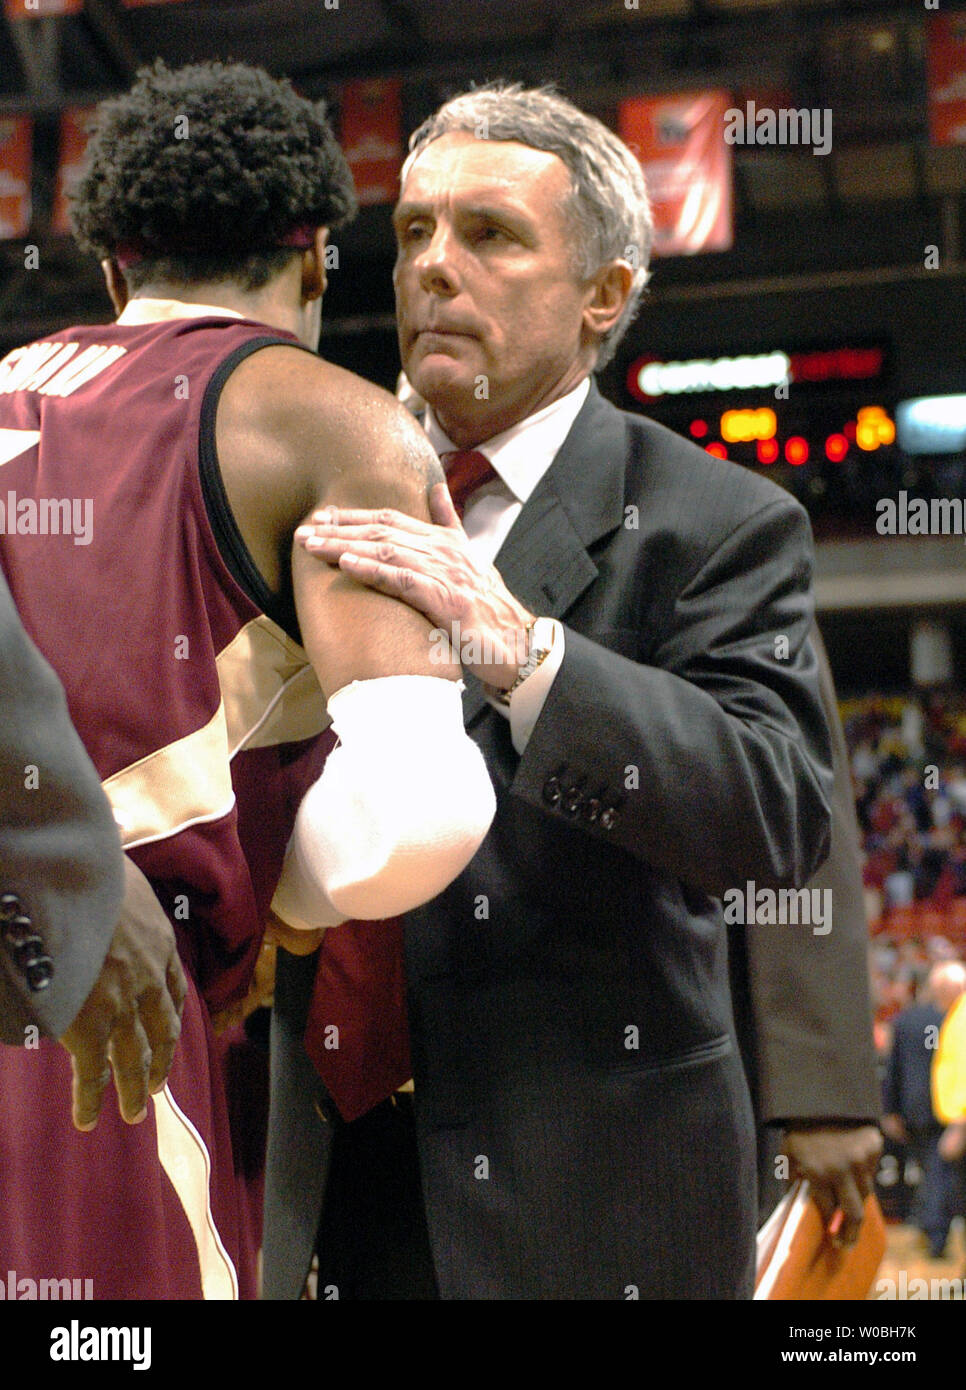 Head Coach Gary Williams of the University of Maryland consoles Isiah Swann after the Terrapins 90-88 overtime victory over the Florida State Seminoles on December 19, 2004 at the Comcast Center in  College Park, MD. (UPI Photo/Mark Goldman) Stock Photo